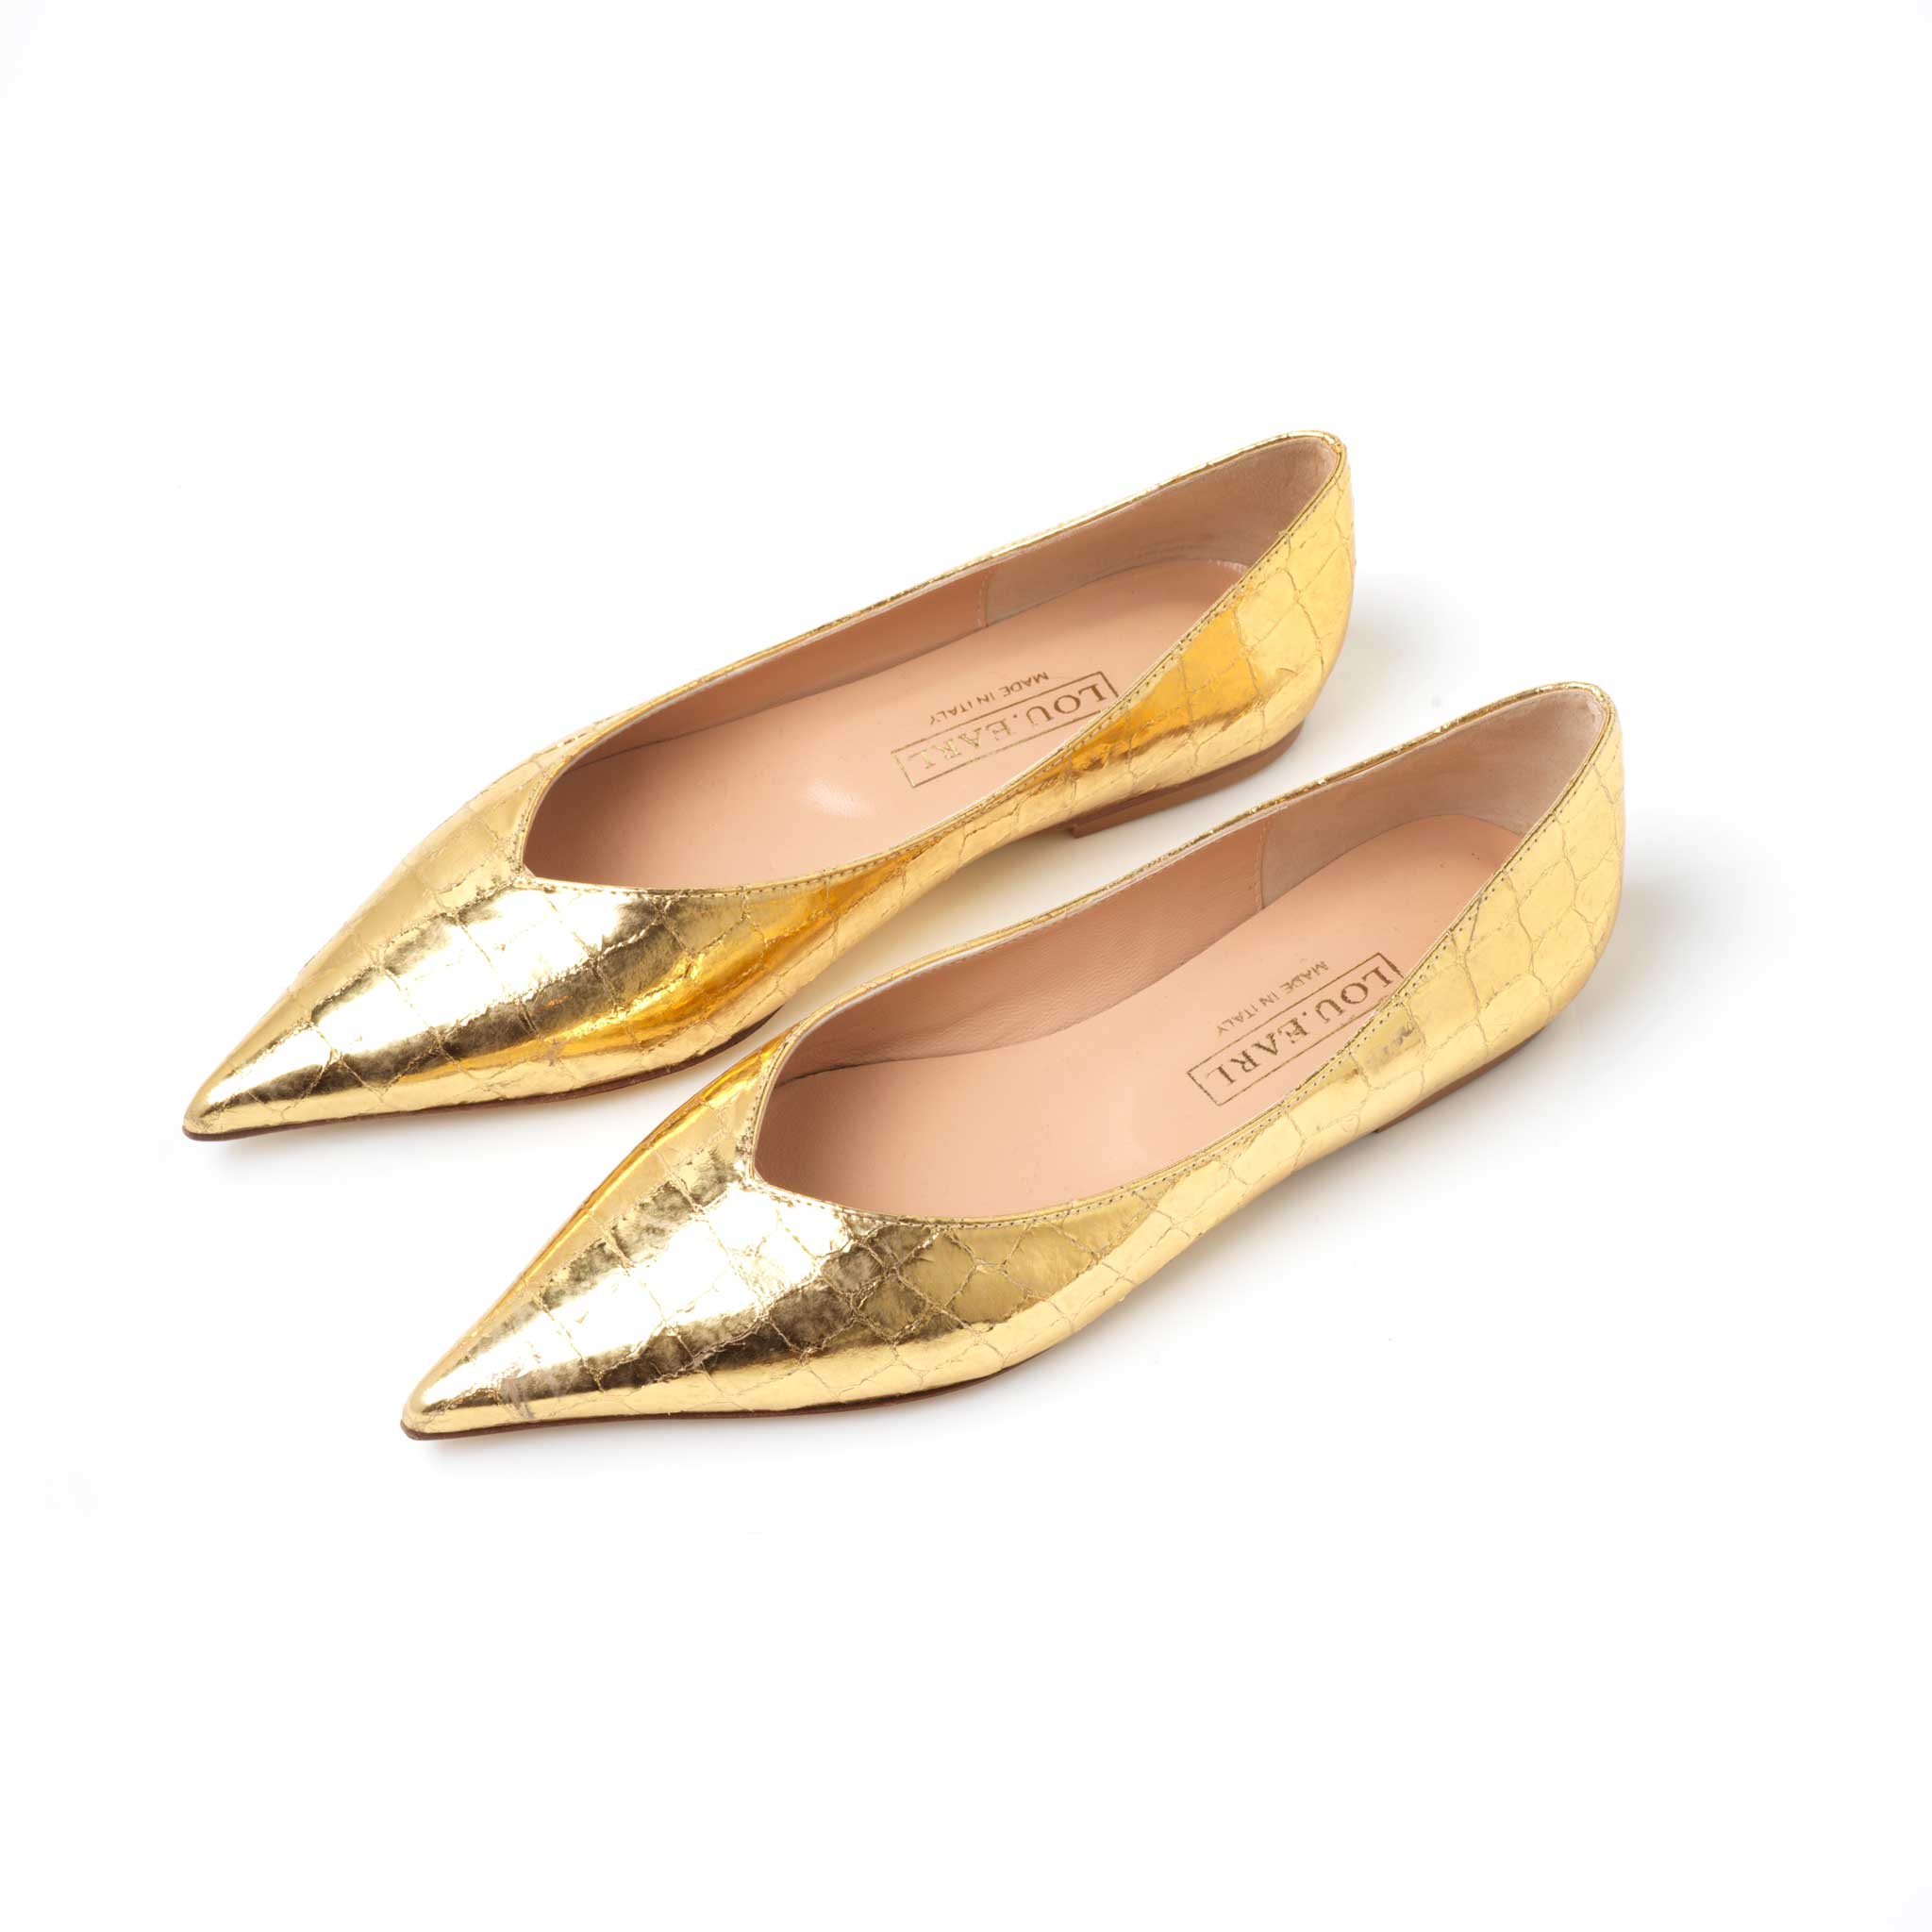 shiny metallic gold pointed toe flats for women on sex and the city